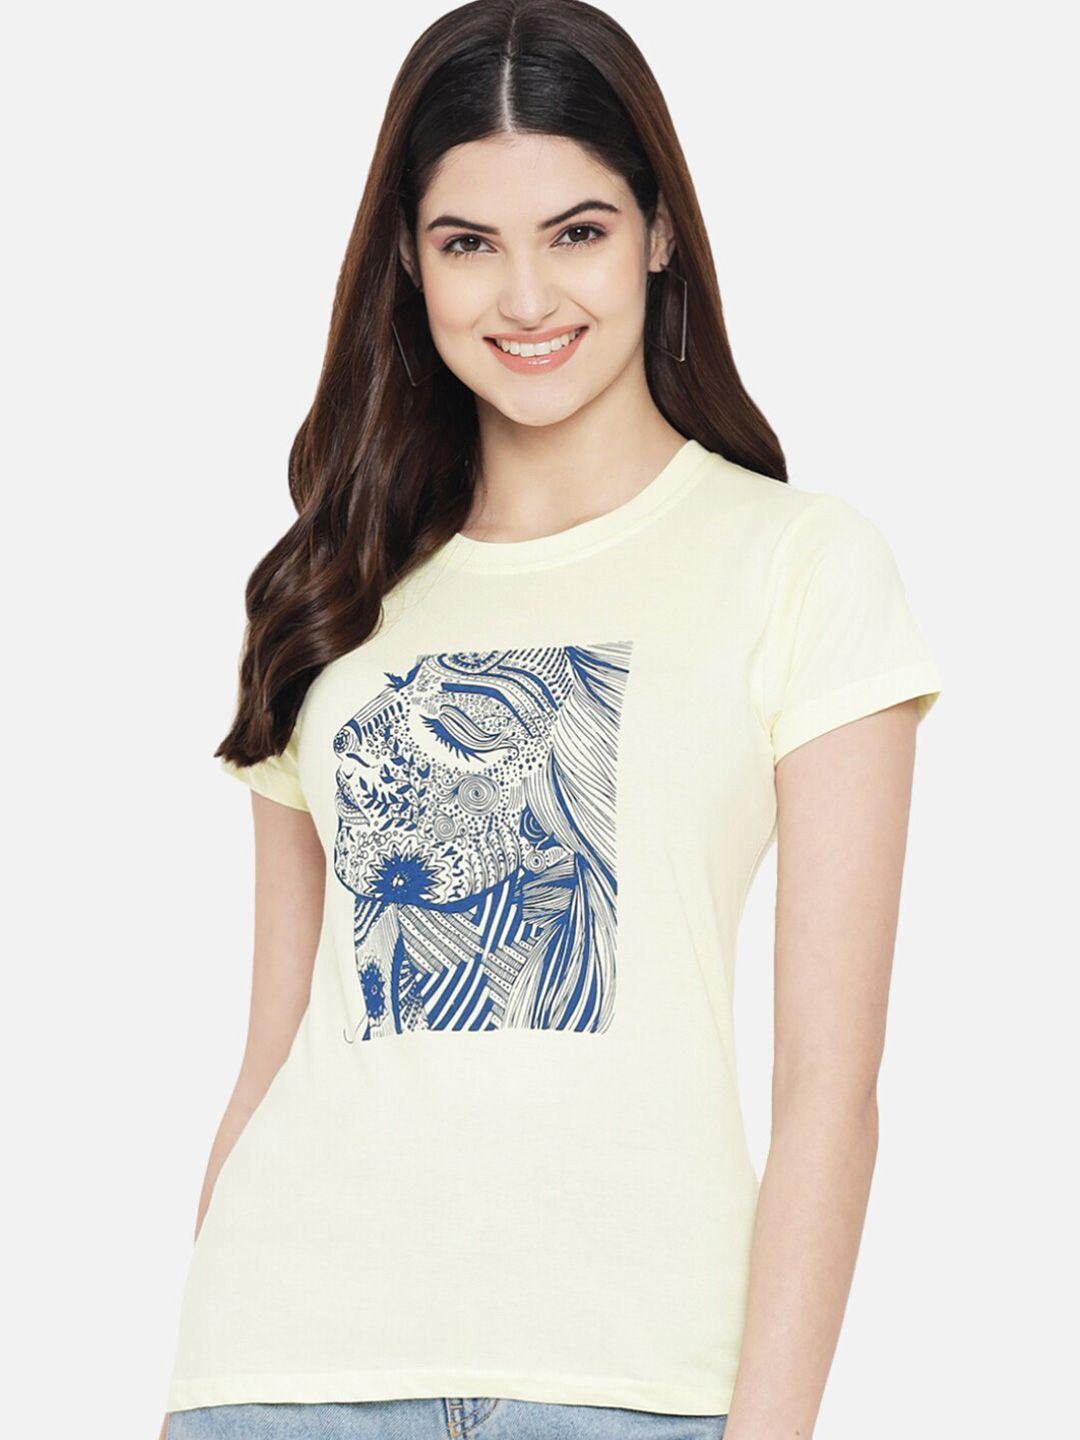 fabflee graphic printed cotton t-shirt